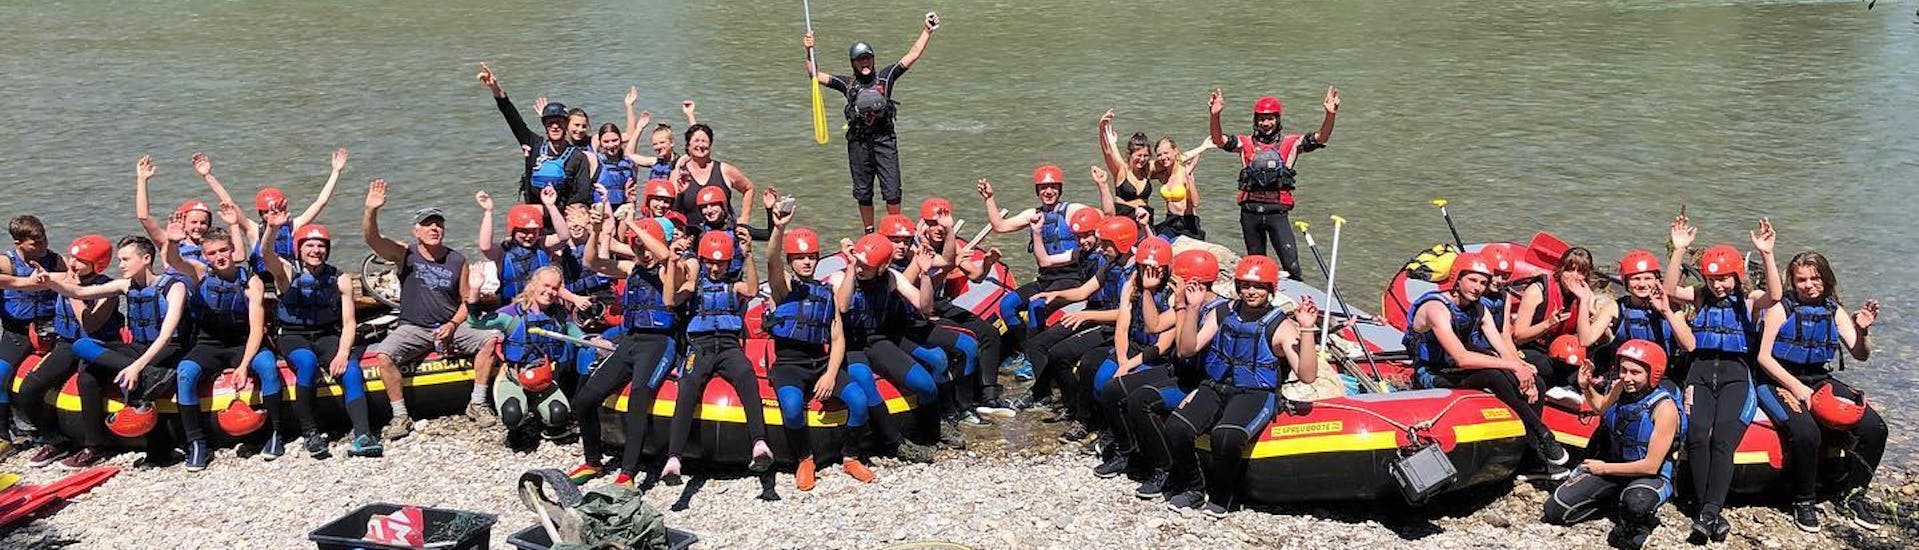 Rafting on the Iller River for Groups (from 8 participants) with Outdoorzentrum Allgäu - Hero image